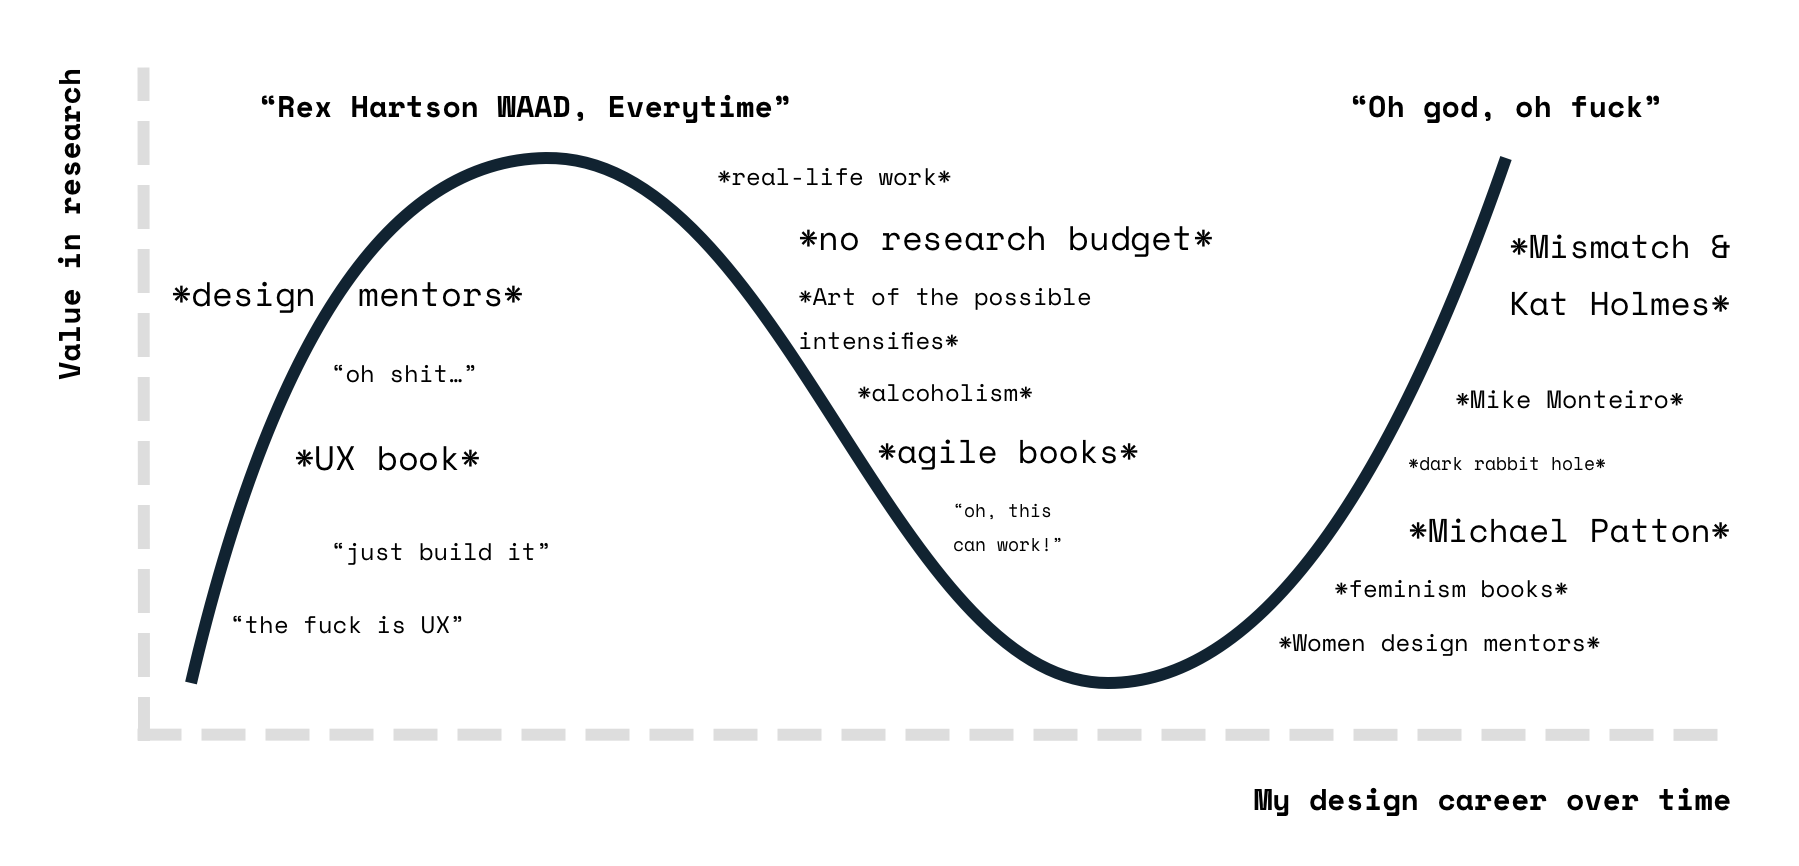 Graph depicting my relationship with research. Originally I started not caring for it at all, but eventually that grew strongly after design mentorship and the UX book. Due to real world work though, that crumbled and I began to study more into agile/ux and so called best practices. This made me feel more confident in my own skills and led me to take shortcuts. However, after reading more feminist books in 2019, my value in research once again skyrocketed.